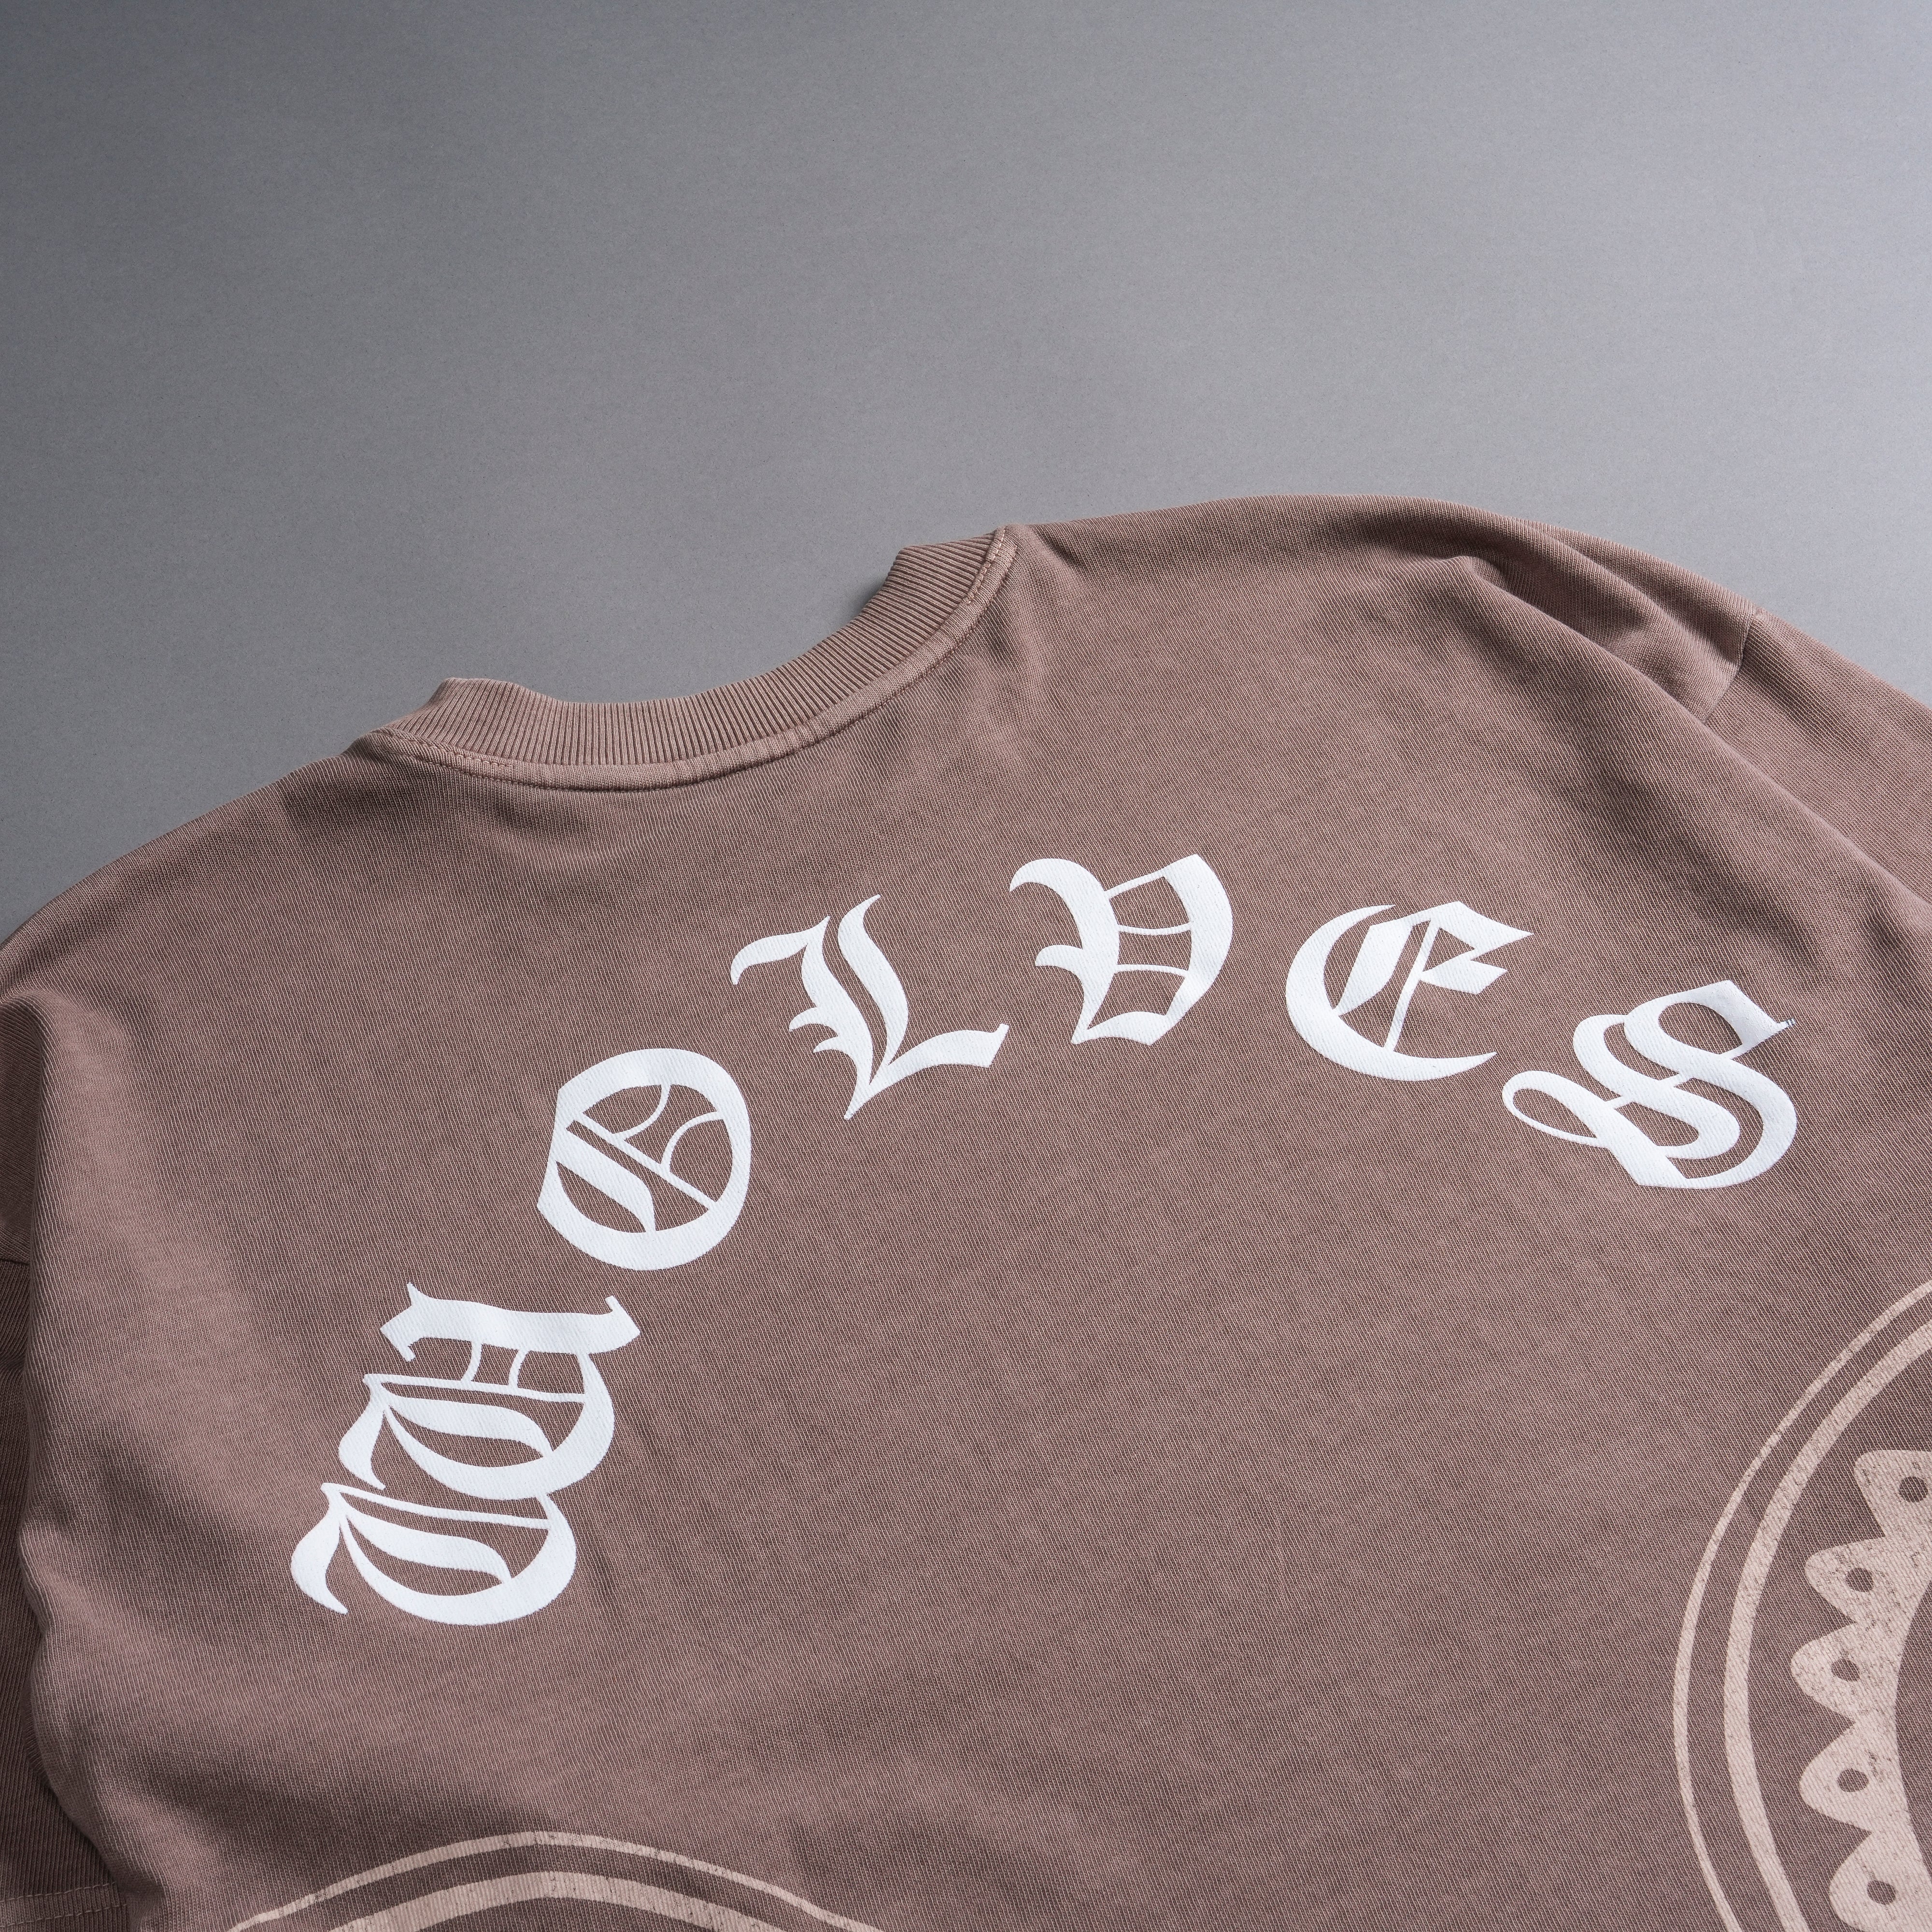 Two Wolves "Premium Vintage" Oversized Unisex Tee in Mojave Brown